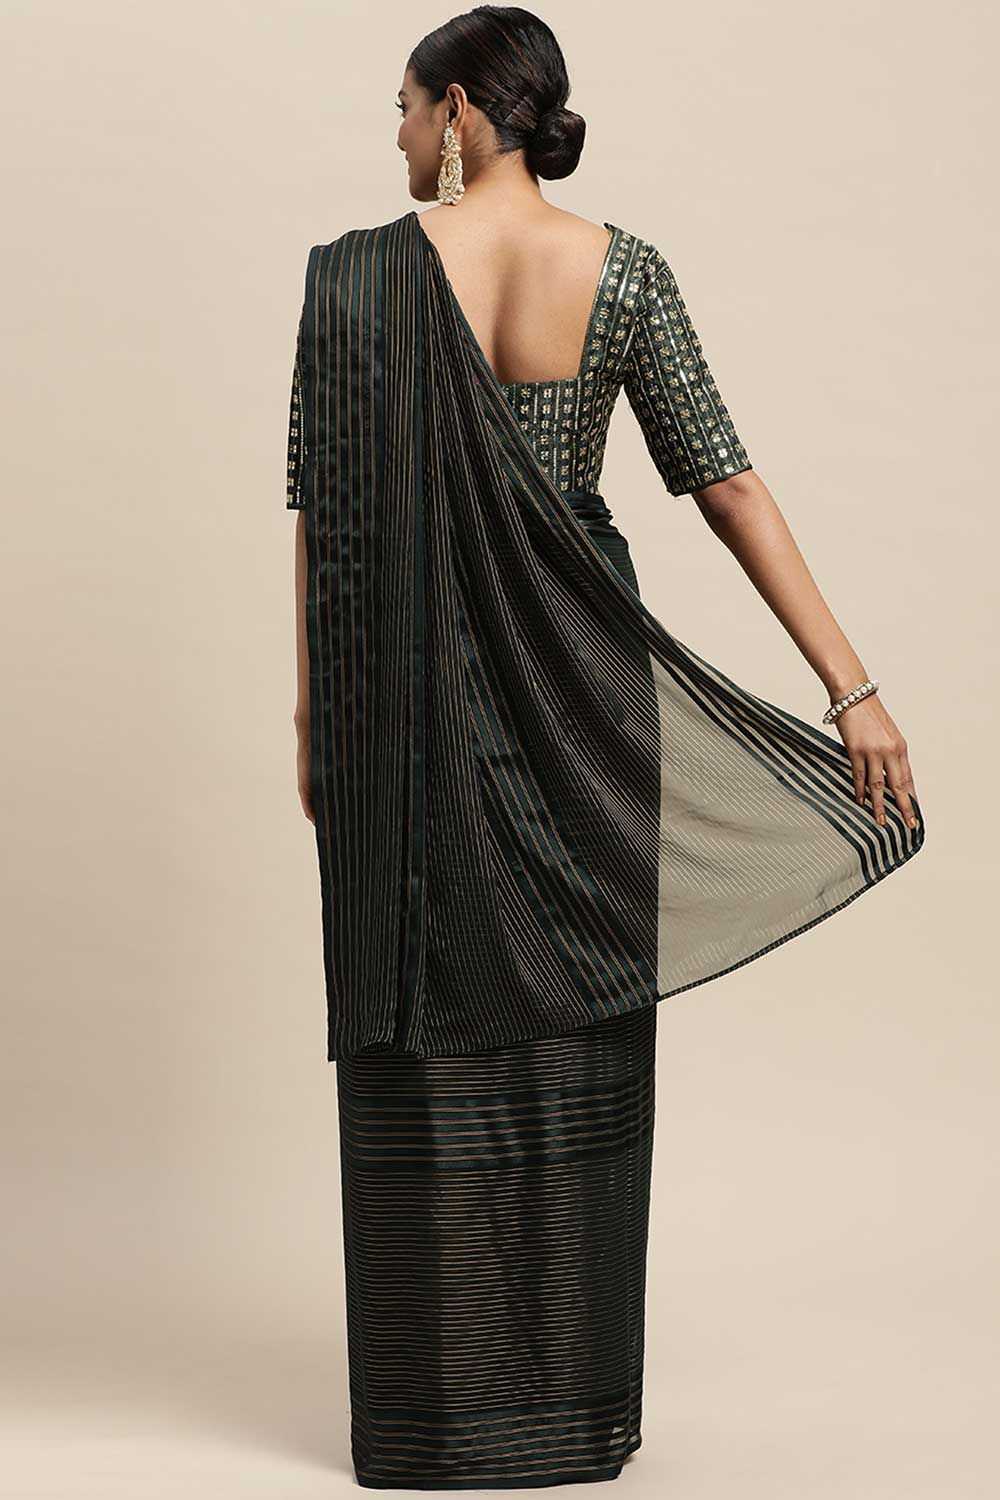 Shop Megha Black Striped Georgette One Minute Saree at best offer at our  Store - One Minute Saree